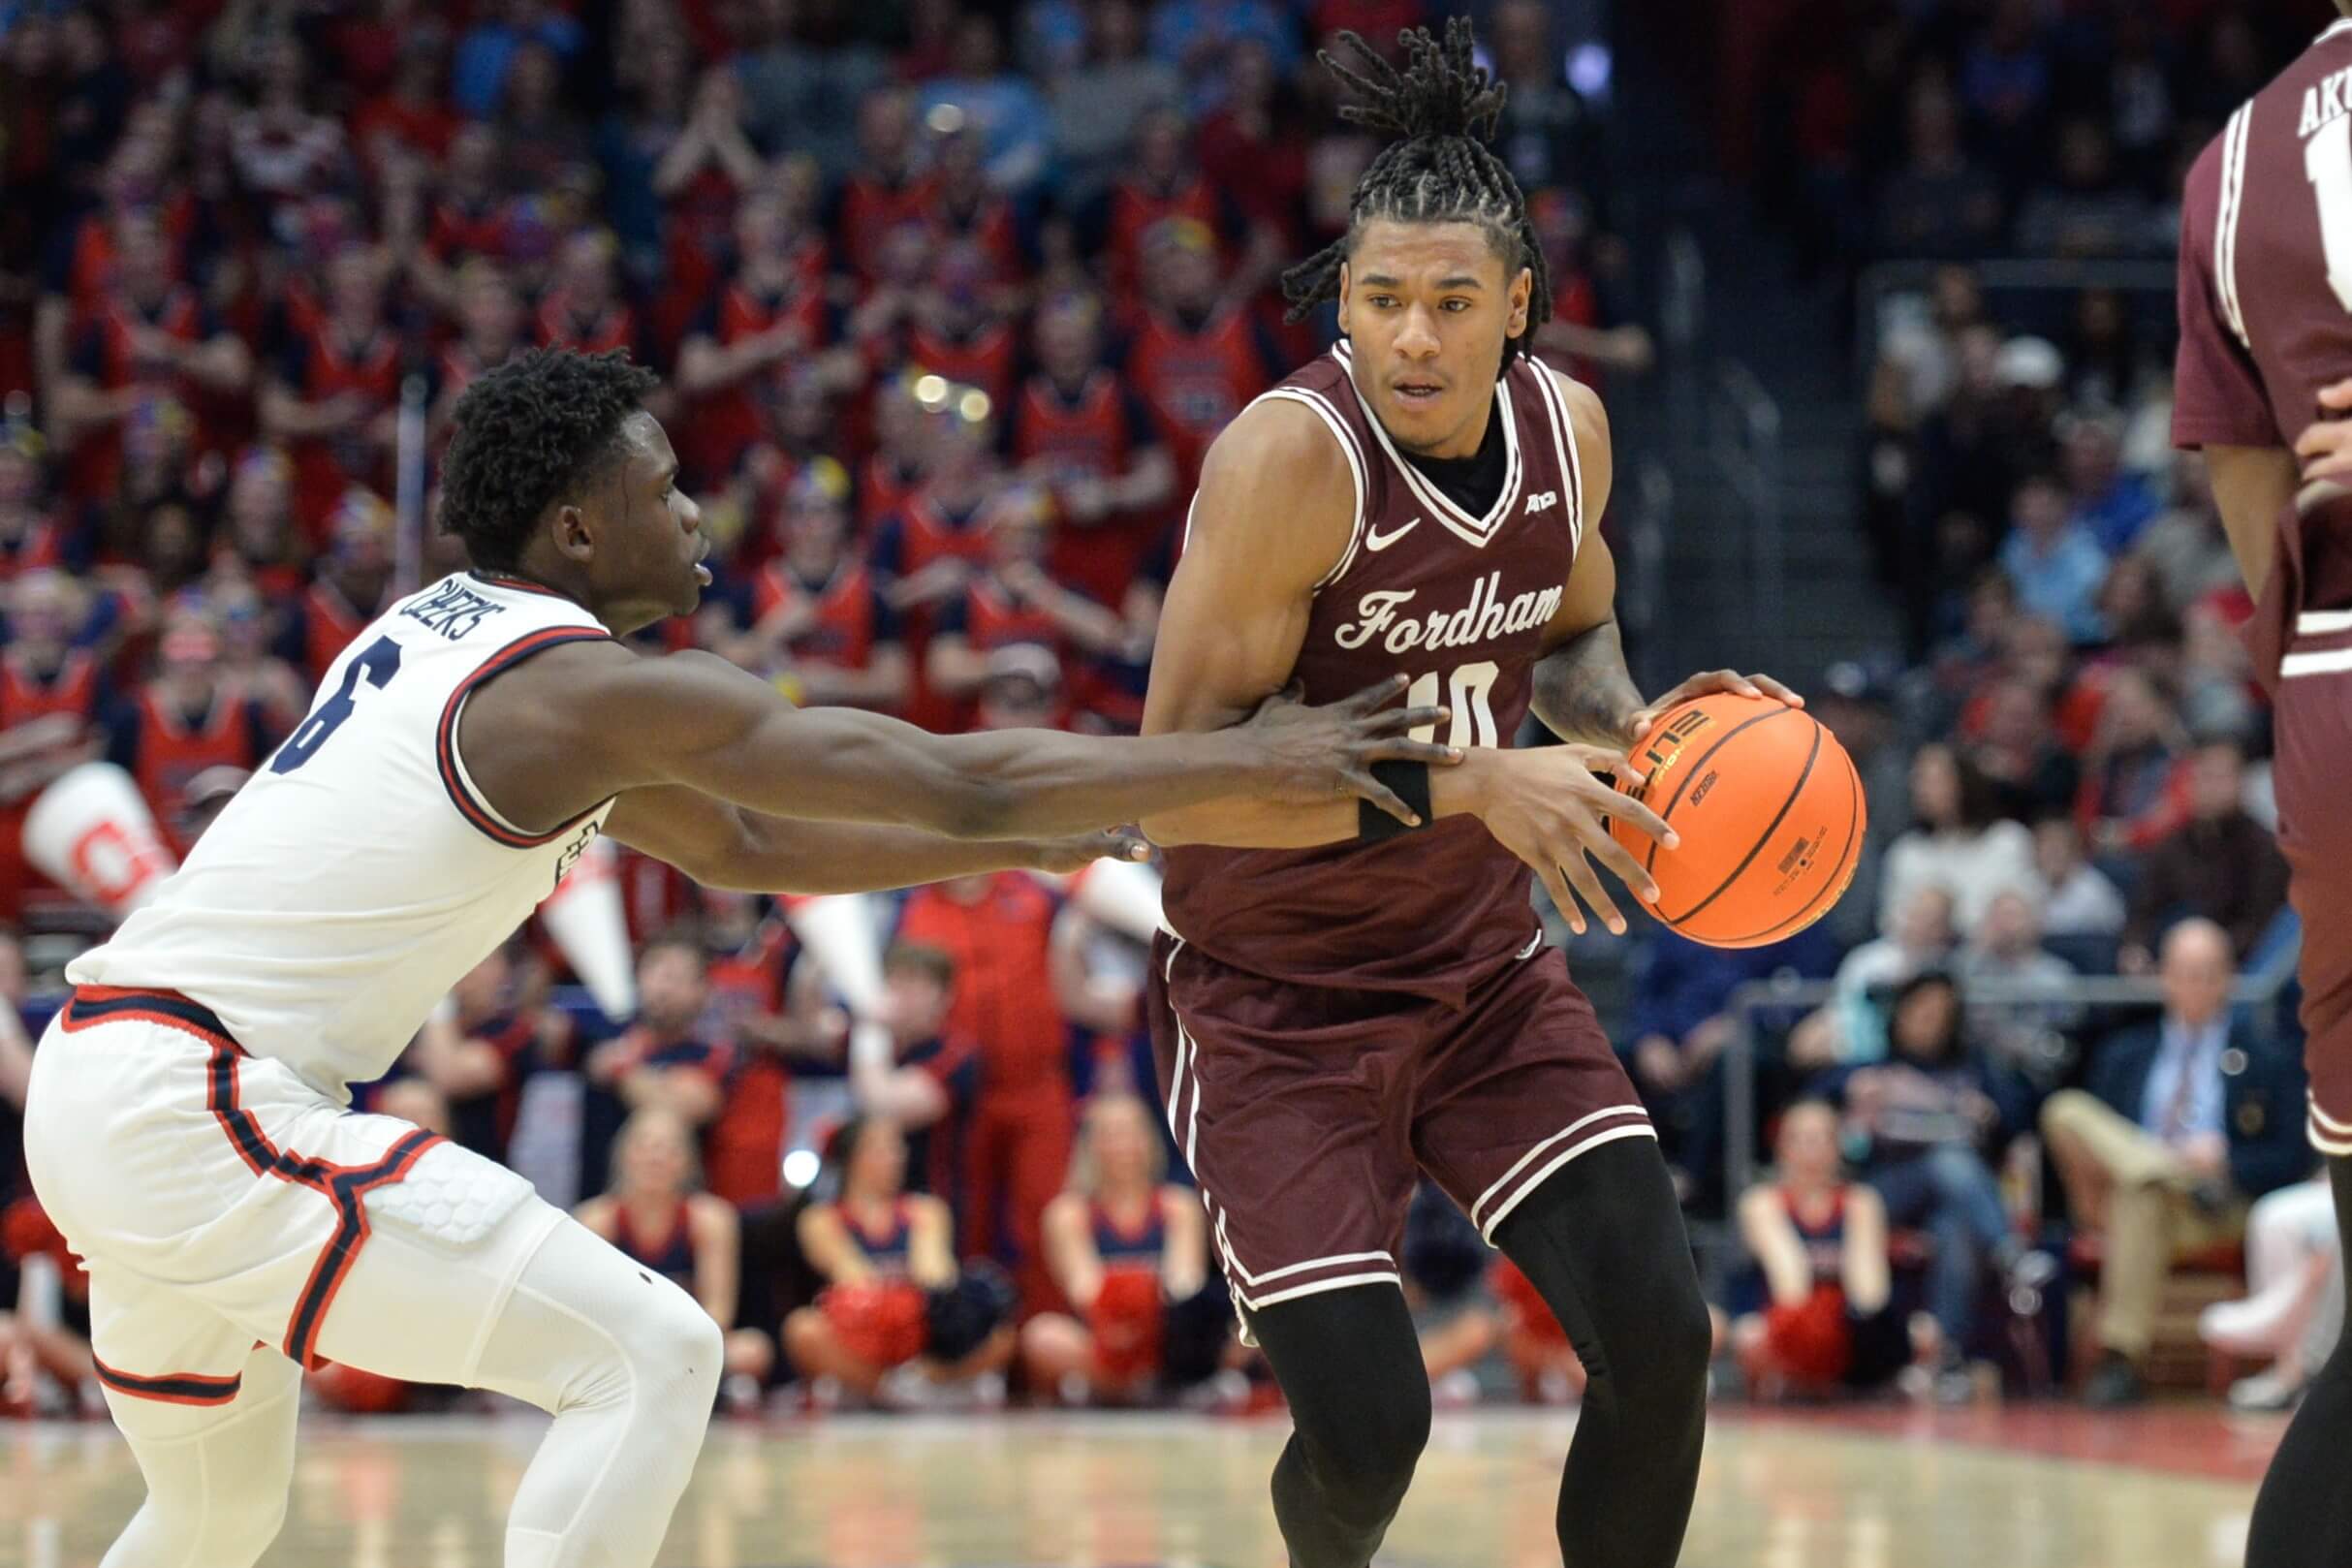 Duquesne vs Fordham Odds, Picks and Predictions: Rose Knows How to Beat Dukes Defense